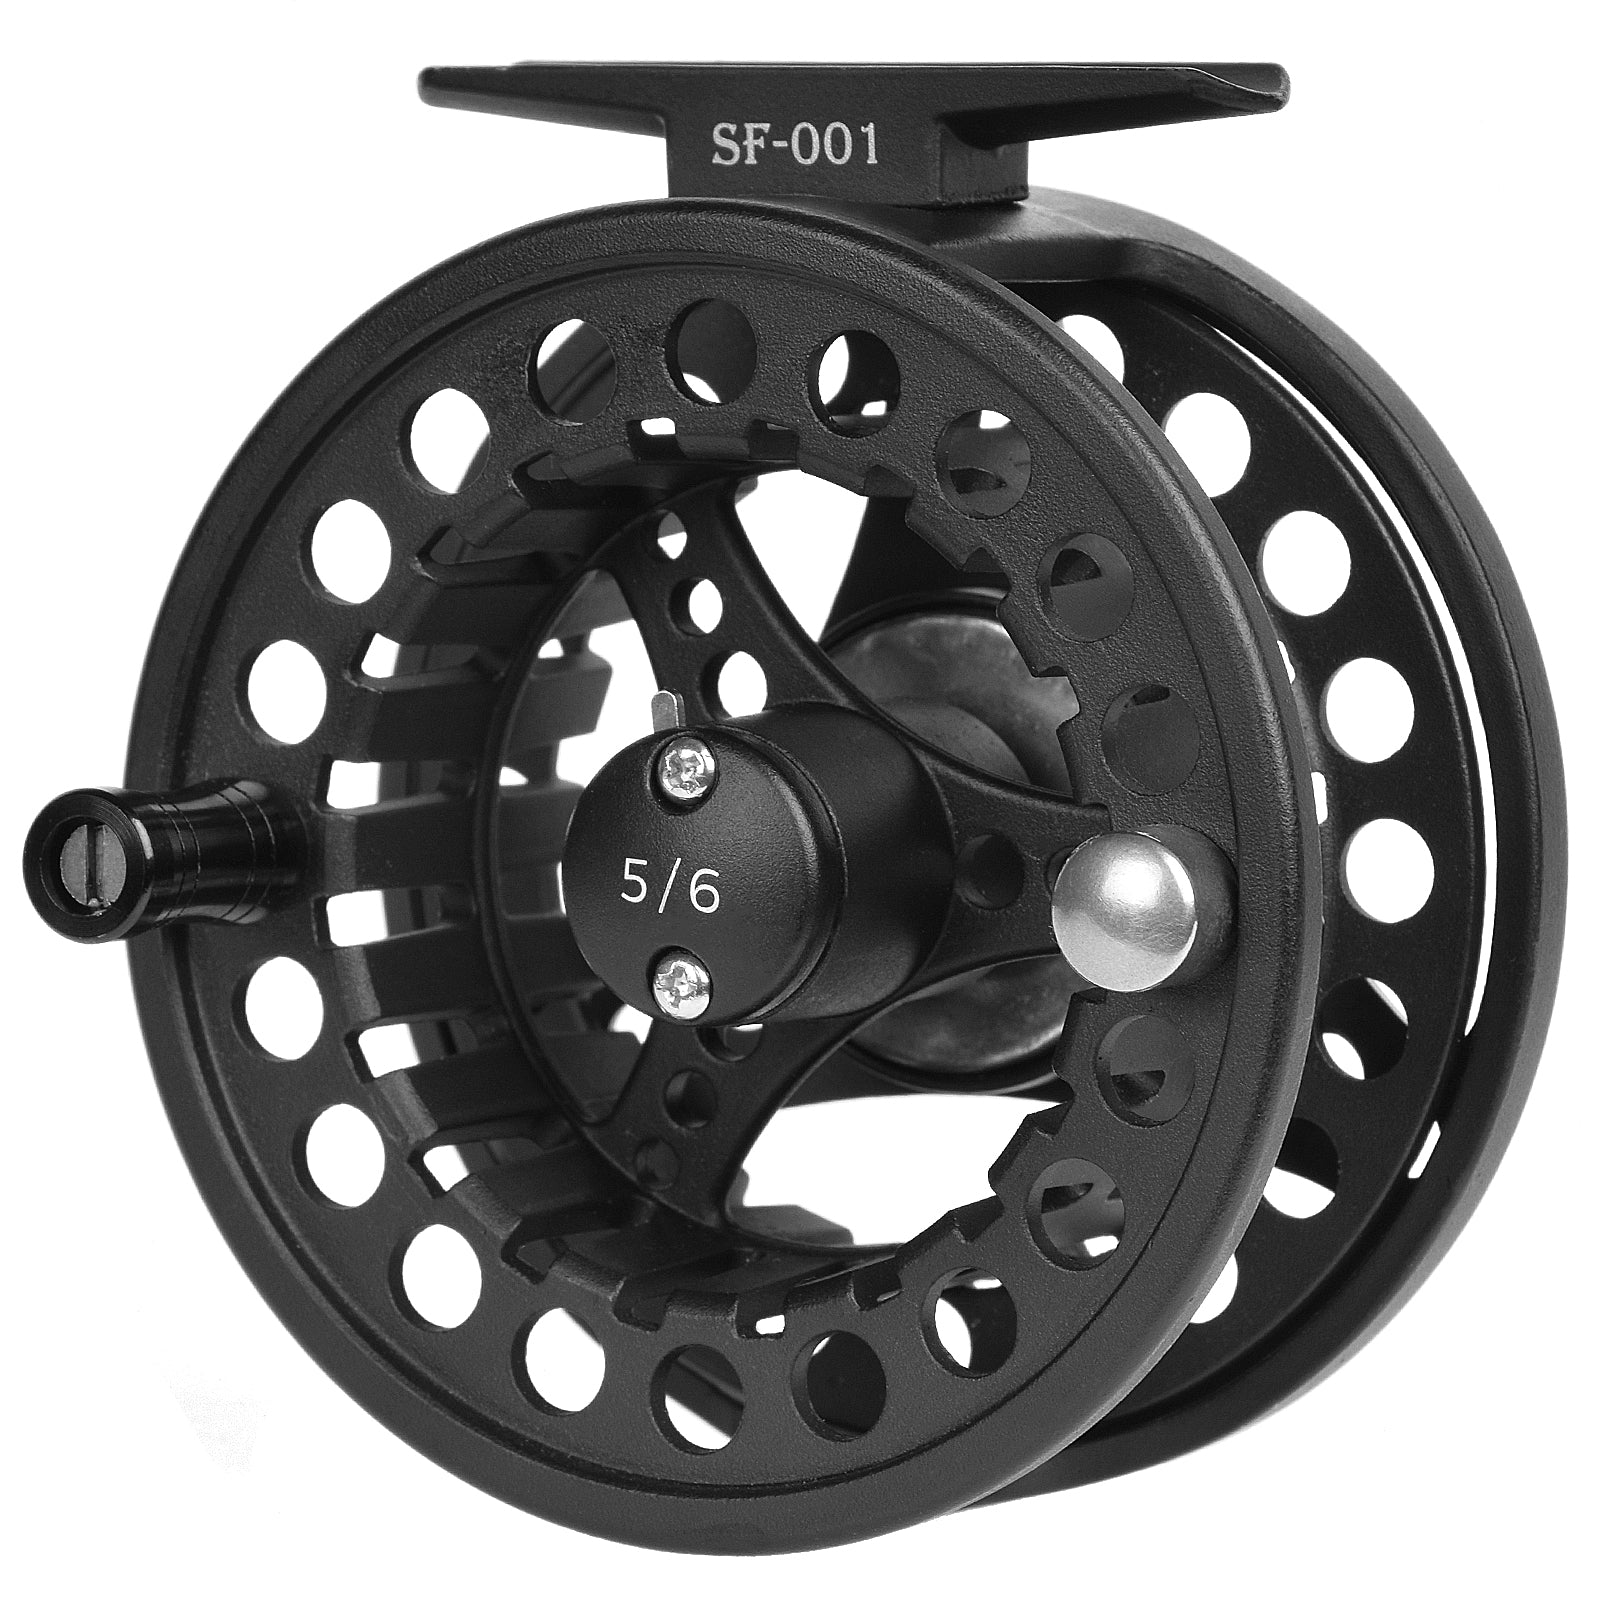 SF SF-001 Large Arbor Fly Fishing Reel with Aluminum Alloy Body 3/4wt 5/6wt  7/8wt Die Cast Pre-Loaded Fly Reel with Line Combo for Trout Bass Carp